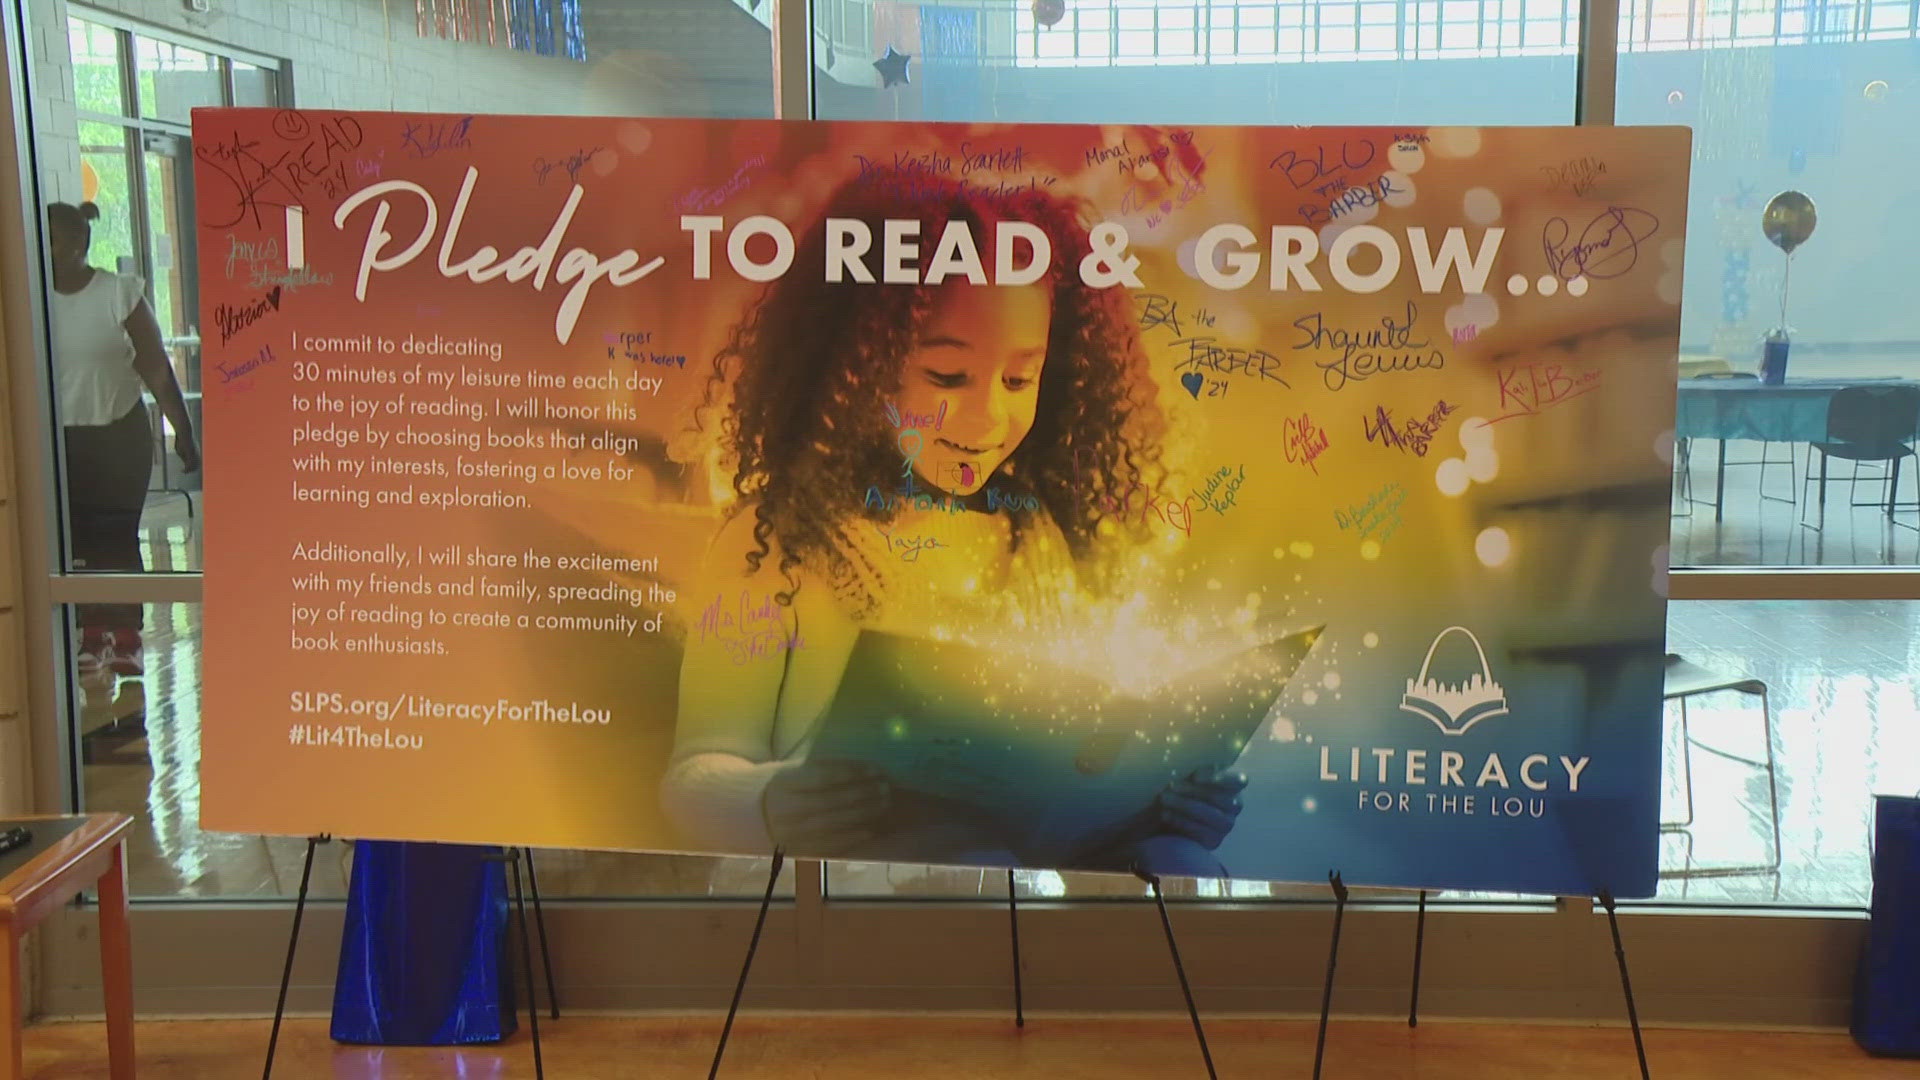 The massive literacy initiative, launched in January, is an all-encompassing effort to increase and improve literacy for all St. Louis children.